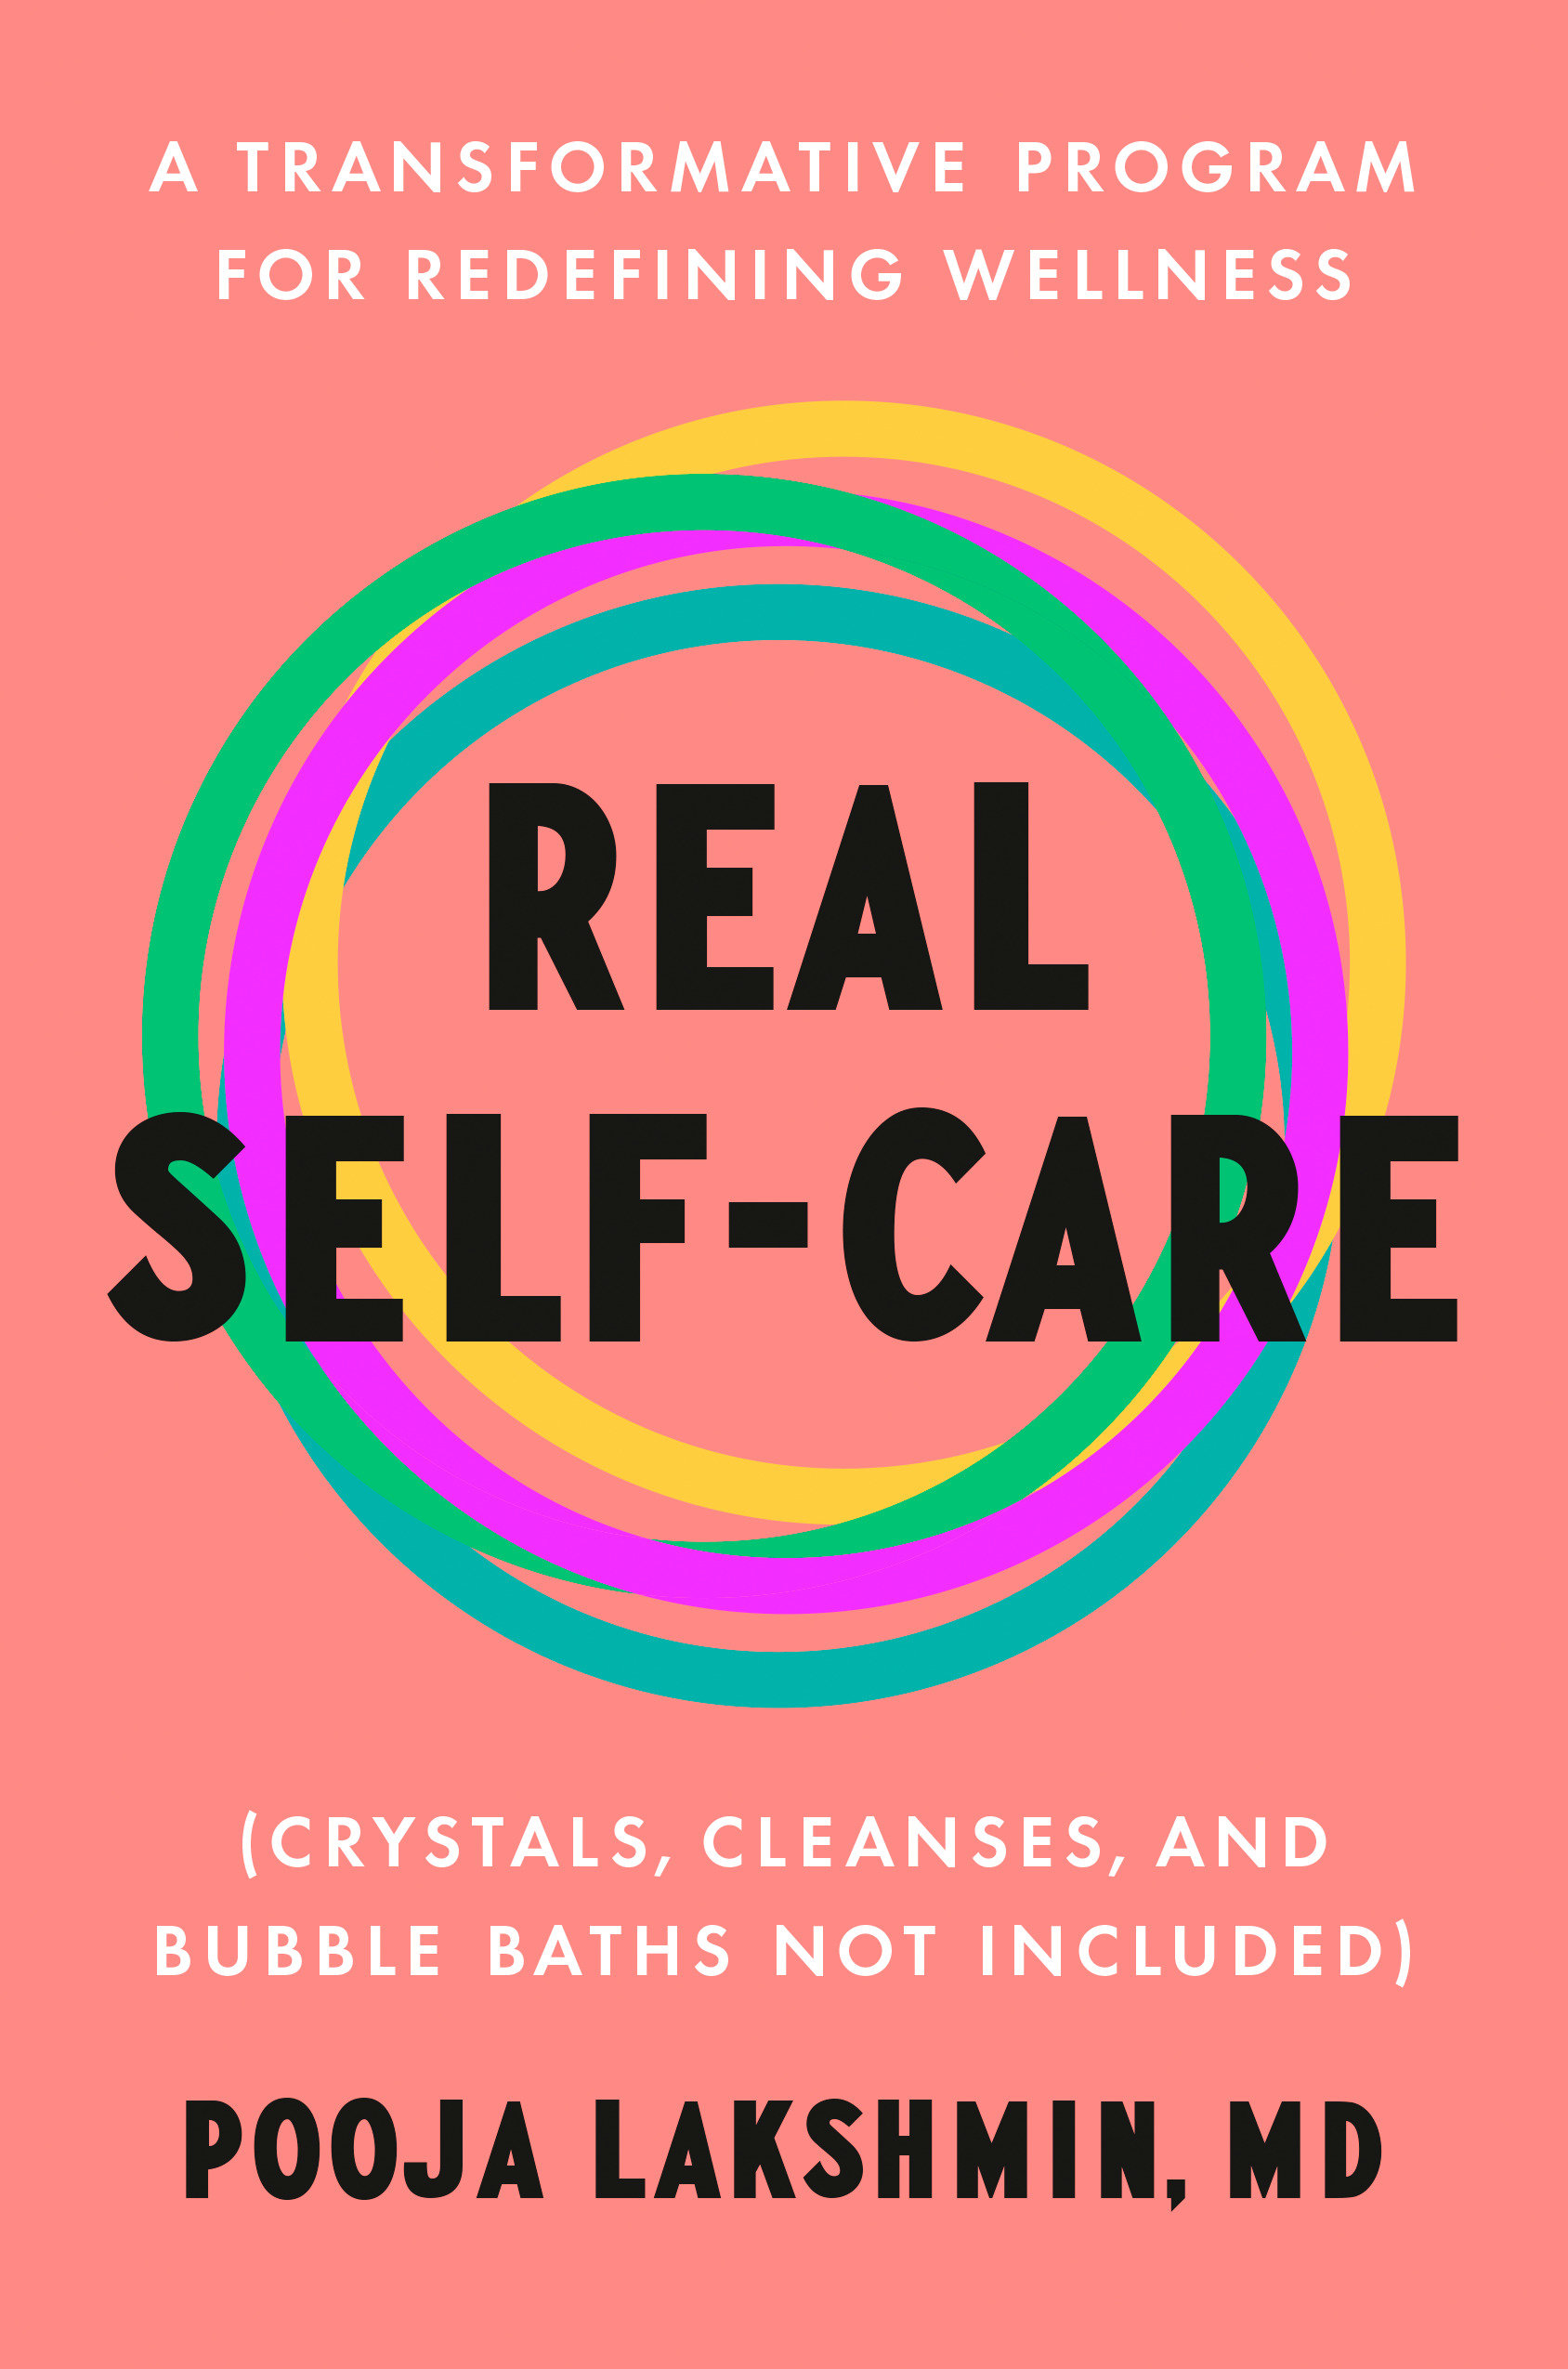 Real Self-Care A Transformative Program for Redefining Wellness (Crystals, Cleanses, and Bubble Baths Not Included) cover image